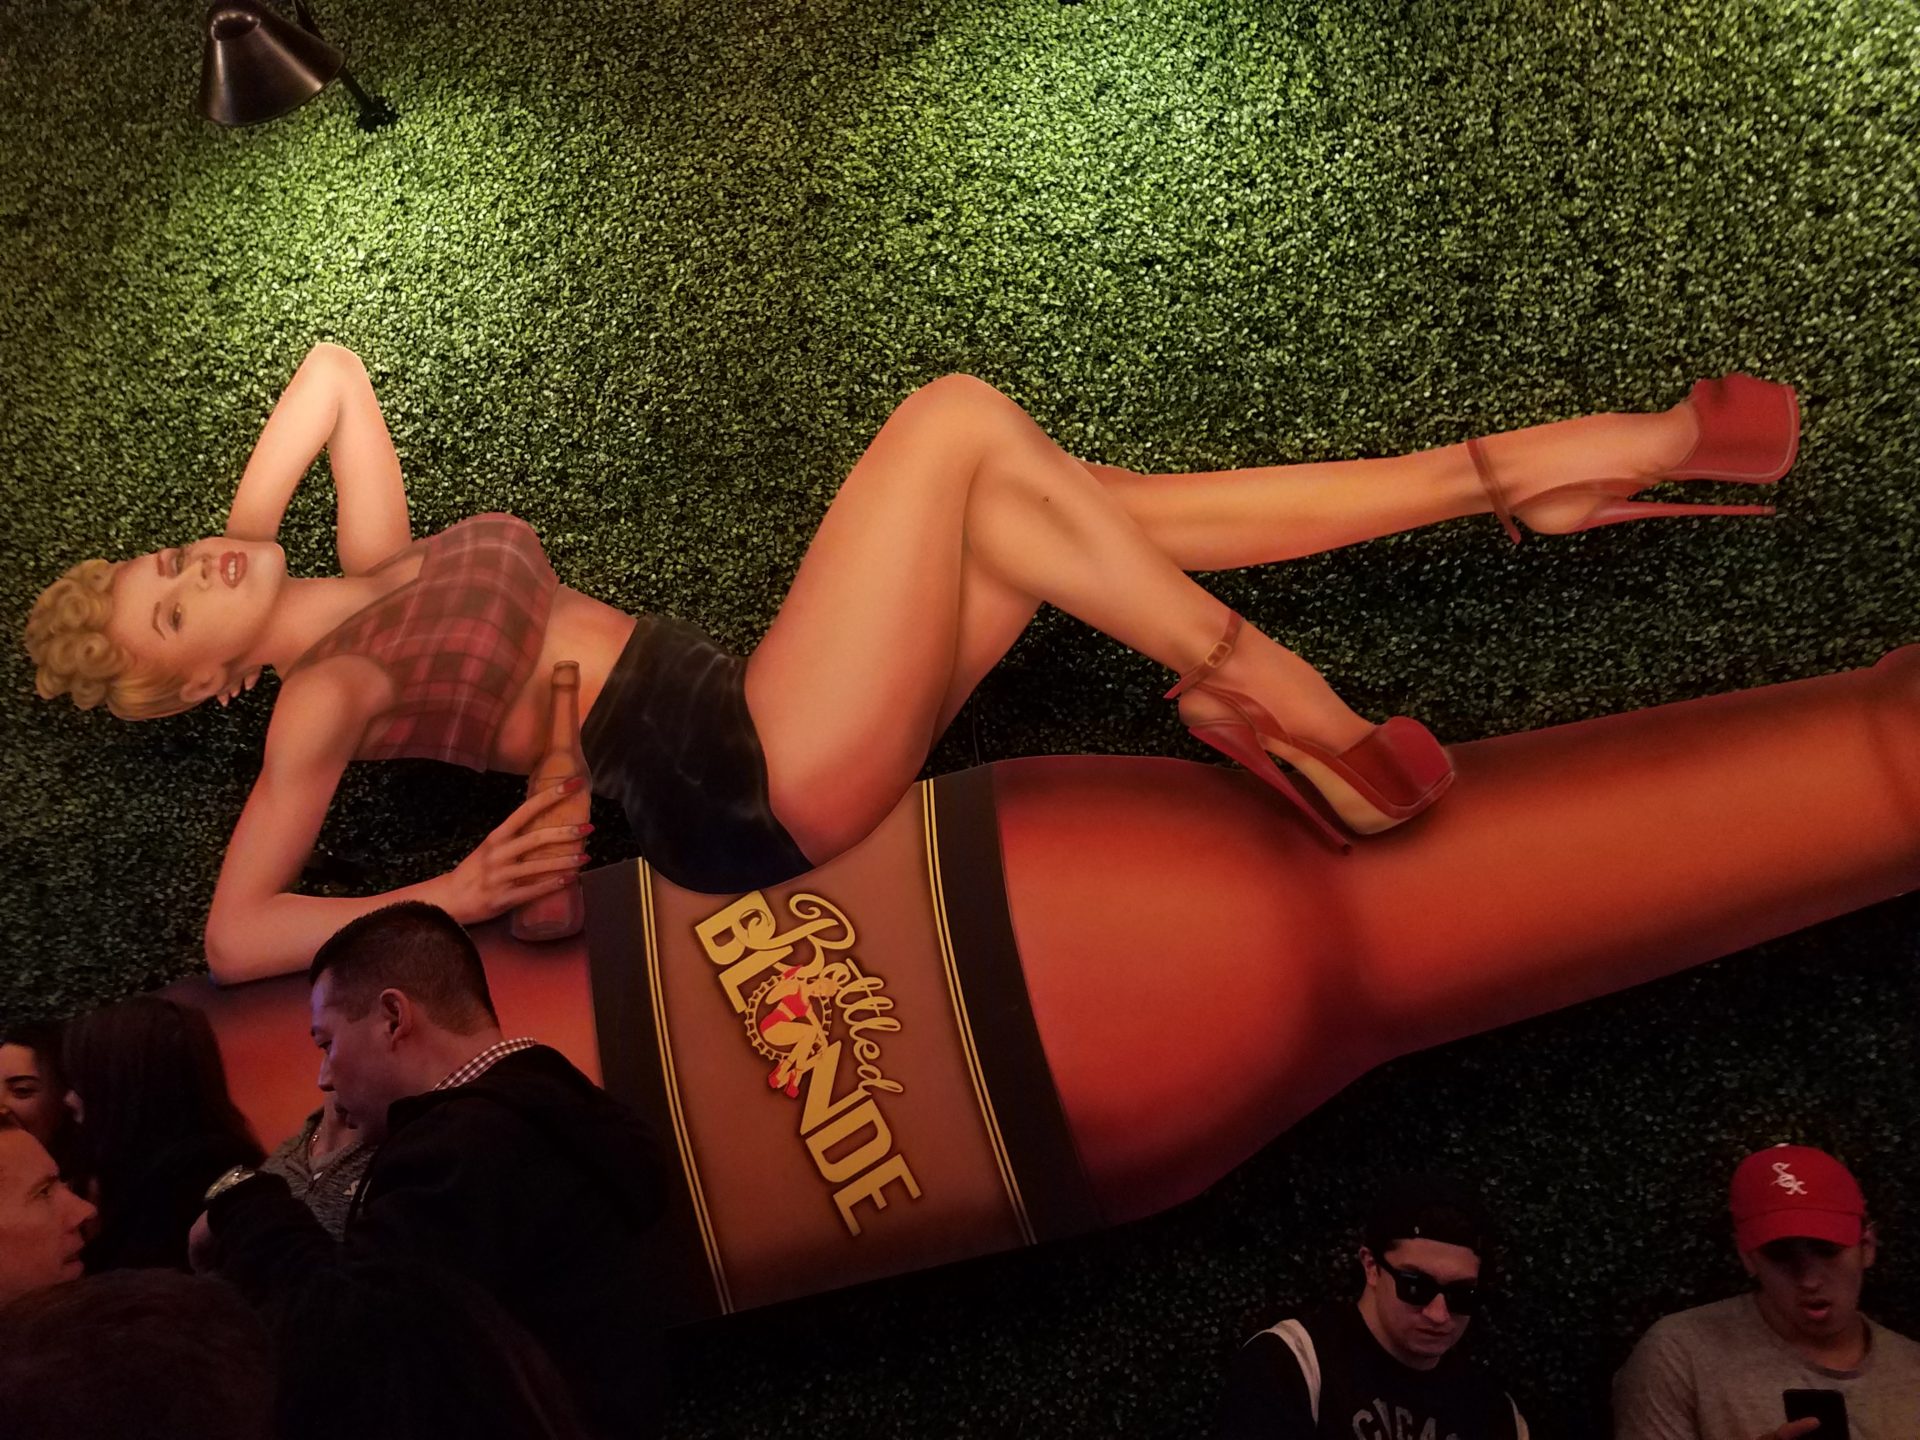 a poster of a woman lying on a beer bottle